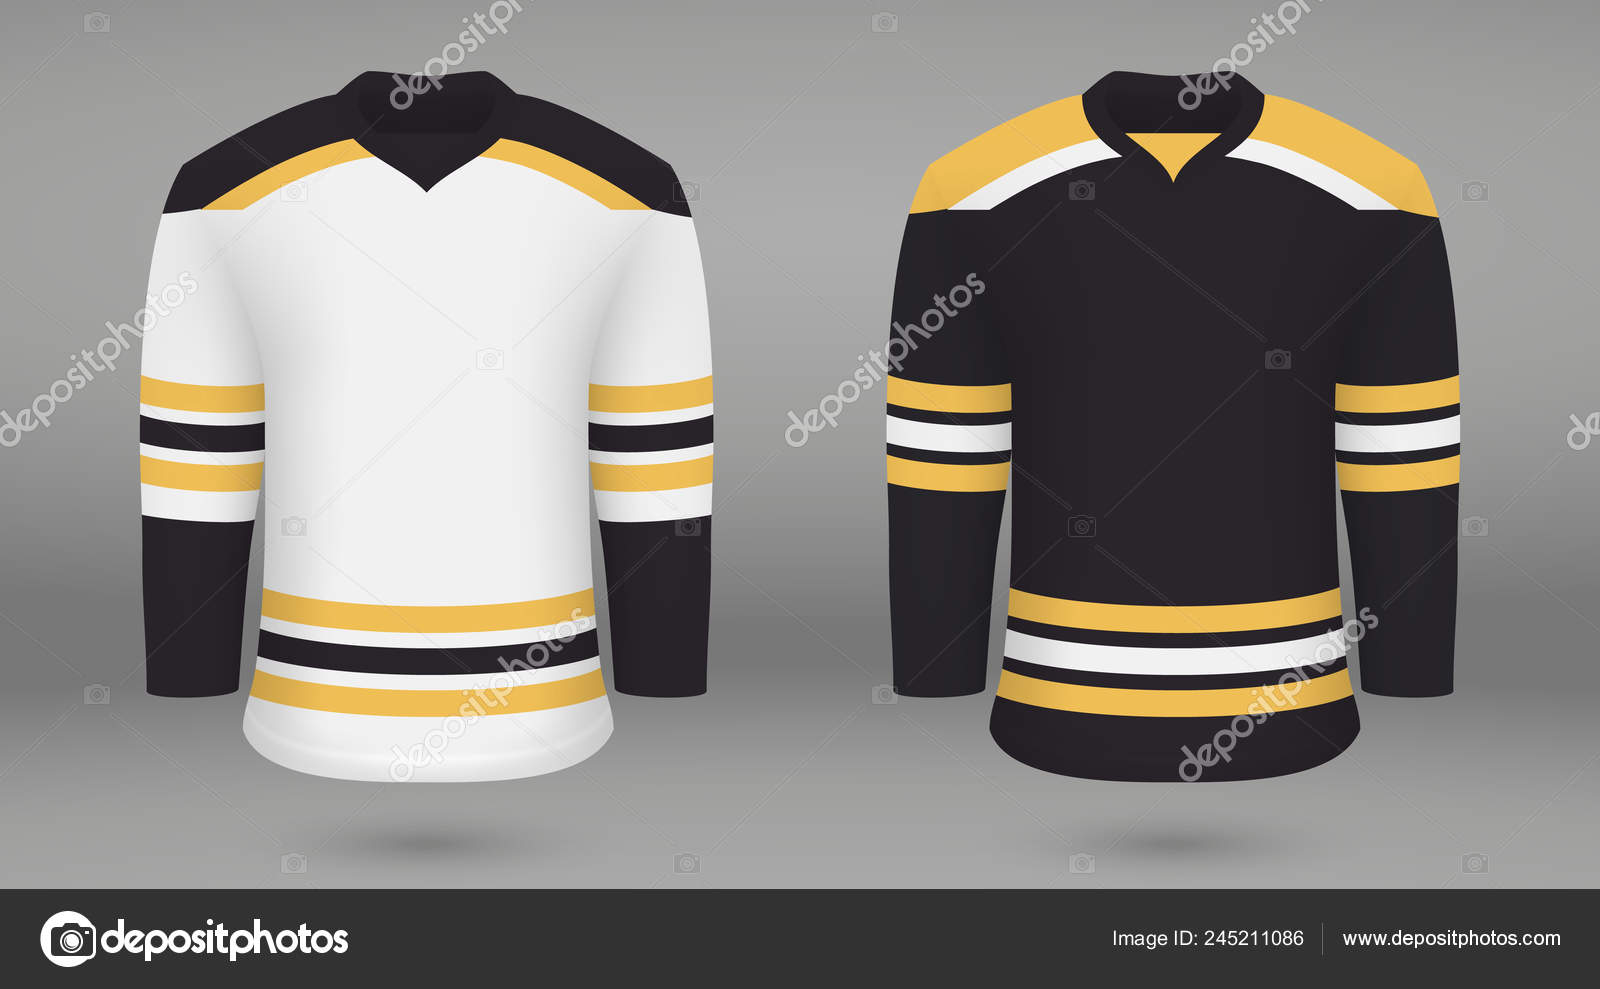 Shirt template forice hockey jersey Royalty Free Vector